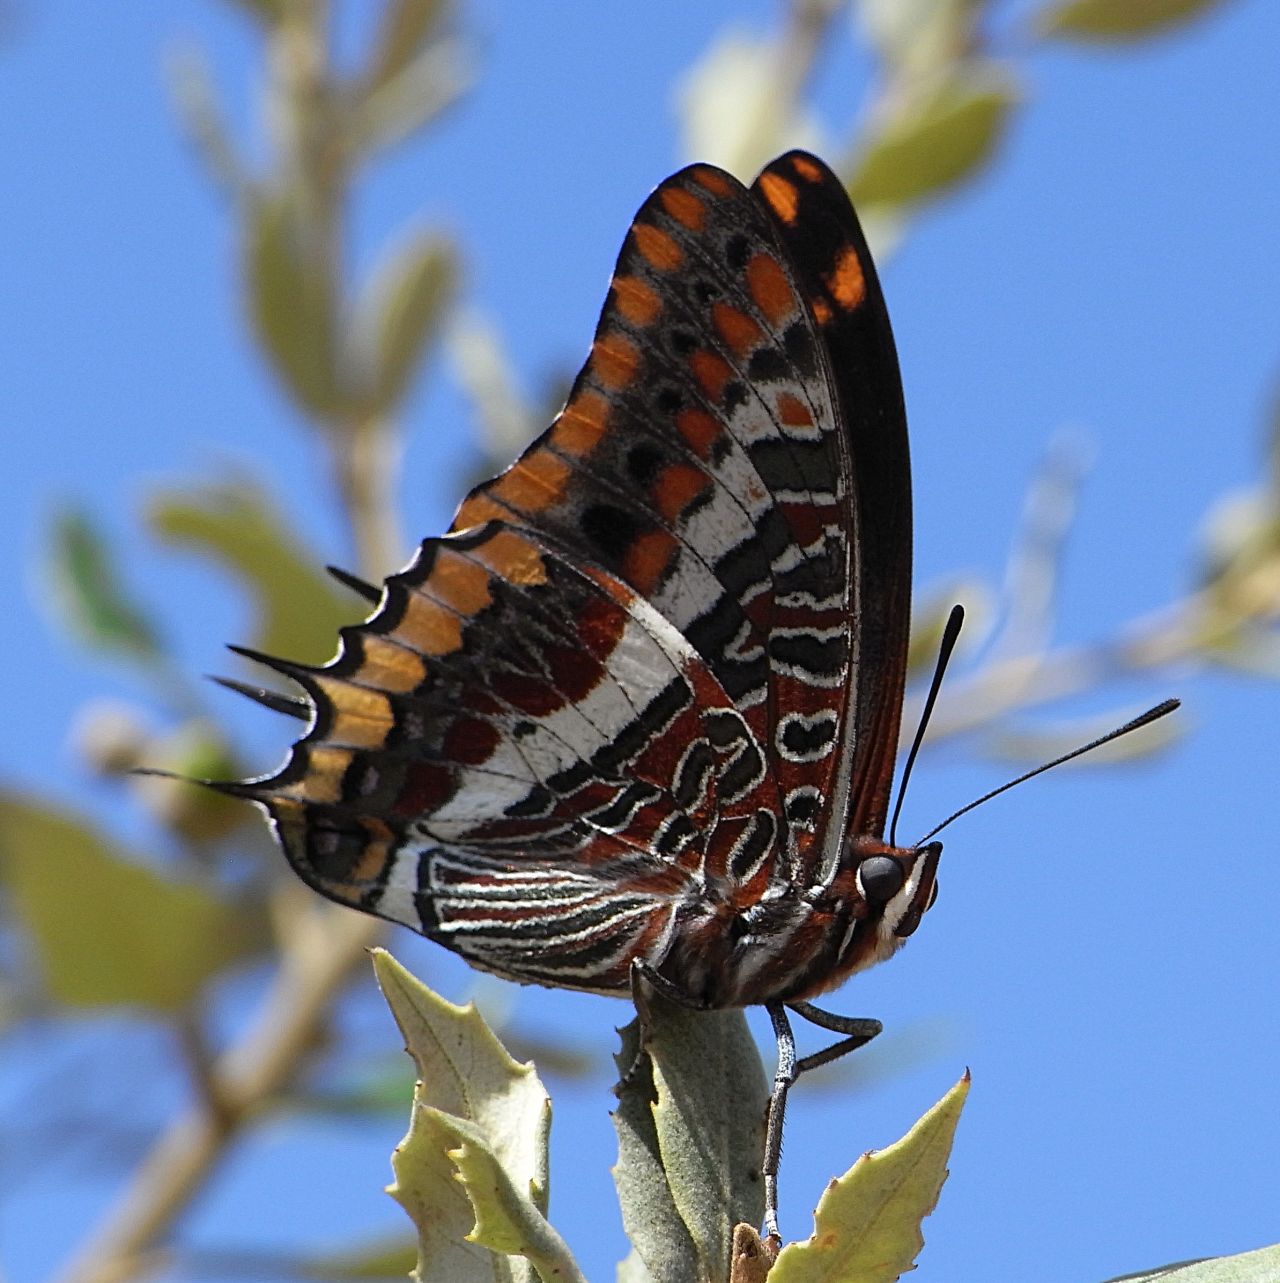 The two-tailed pasha can be found in southern Europe and is less at risk than some other European butterfly species. Of Europe's endemic butterflies, 16% are under threat, says the IUCN.